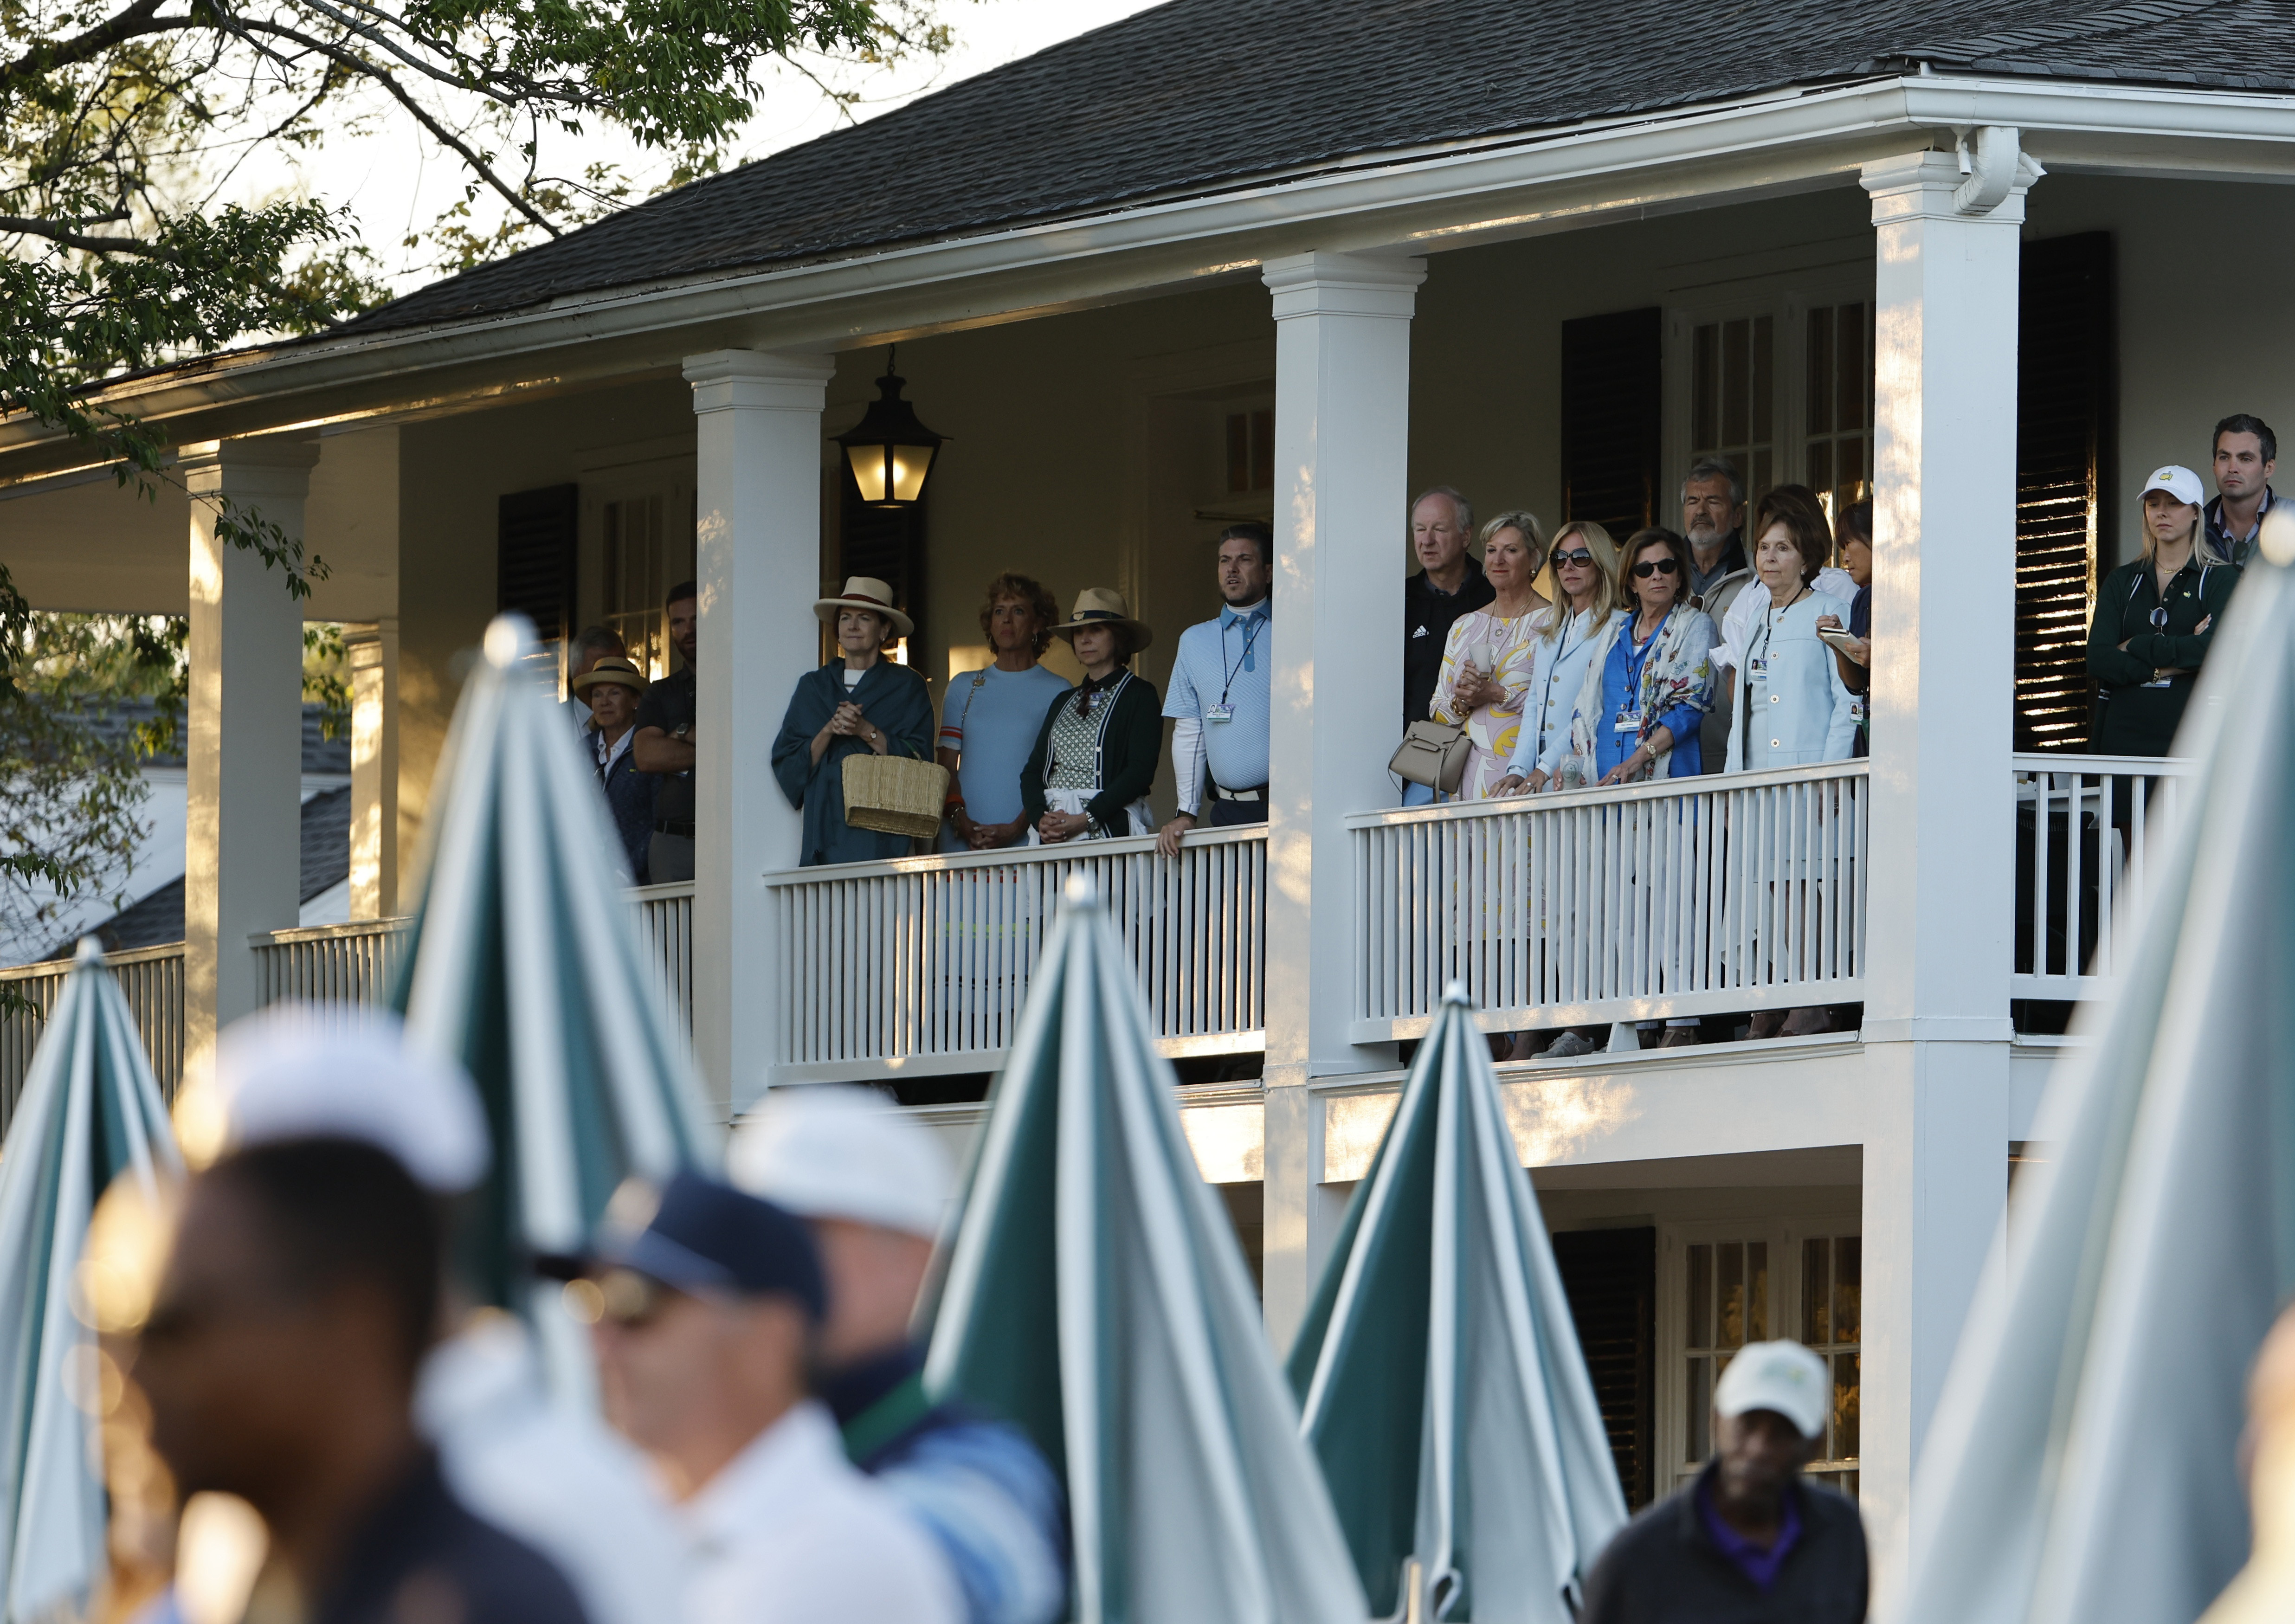 Masters Tournament Will Let LIV Golf Players Compete in 2023 - The